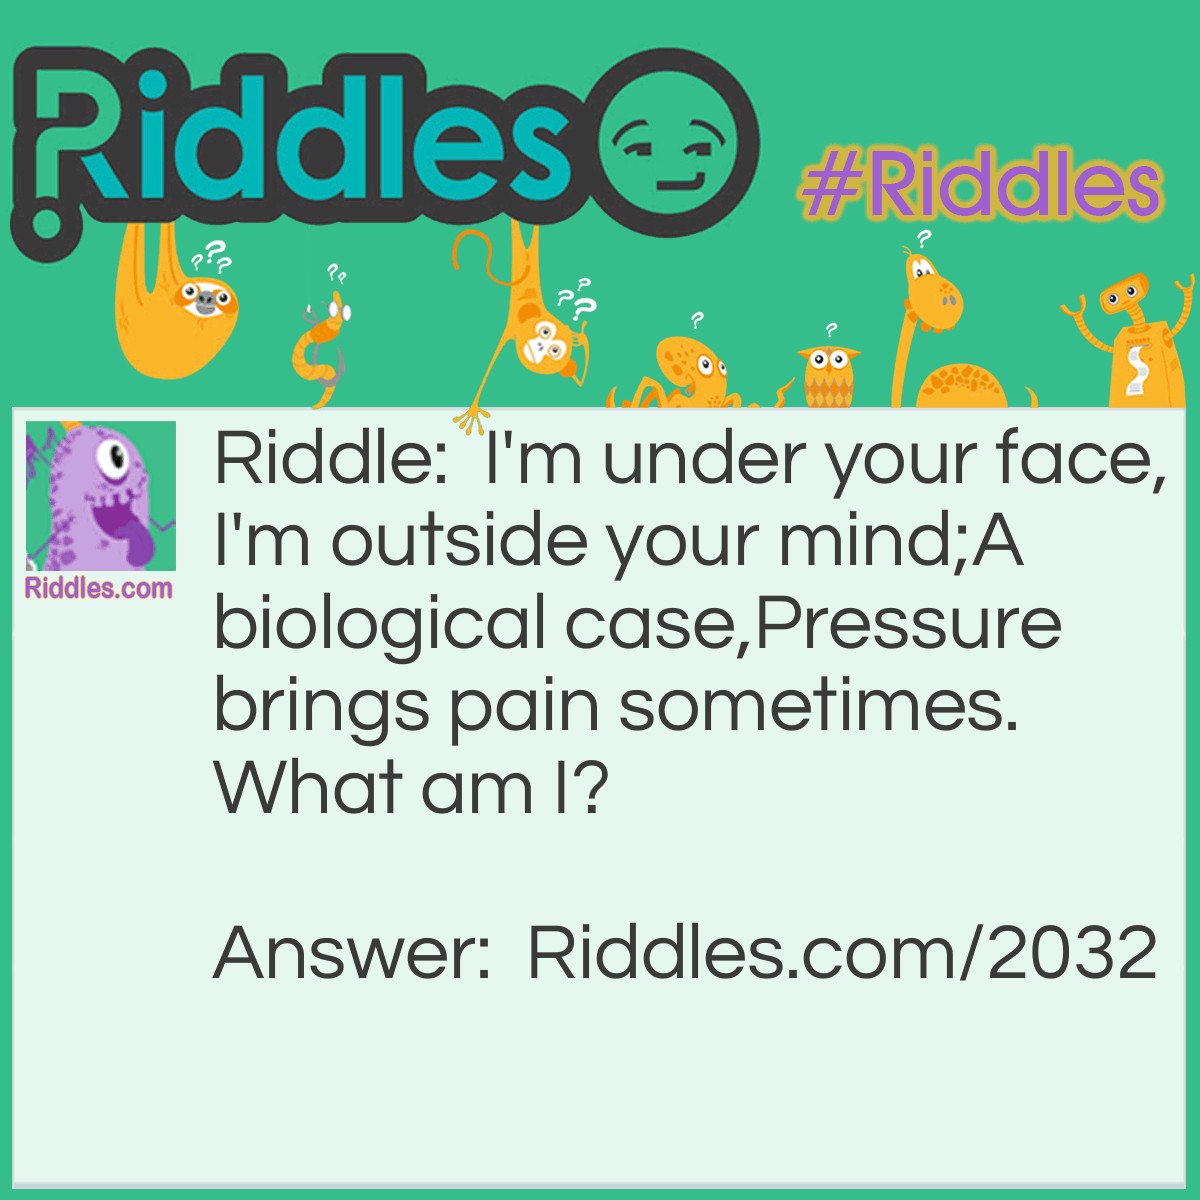 Riddle: I'm under your face,
I'm outside your mind;
A biological case,
Pressure brings pain sometimes.
What am I? Answer: Your skull.